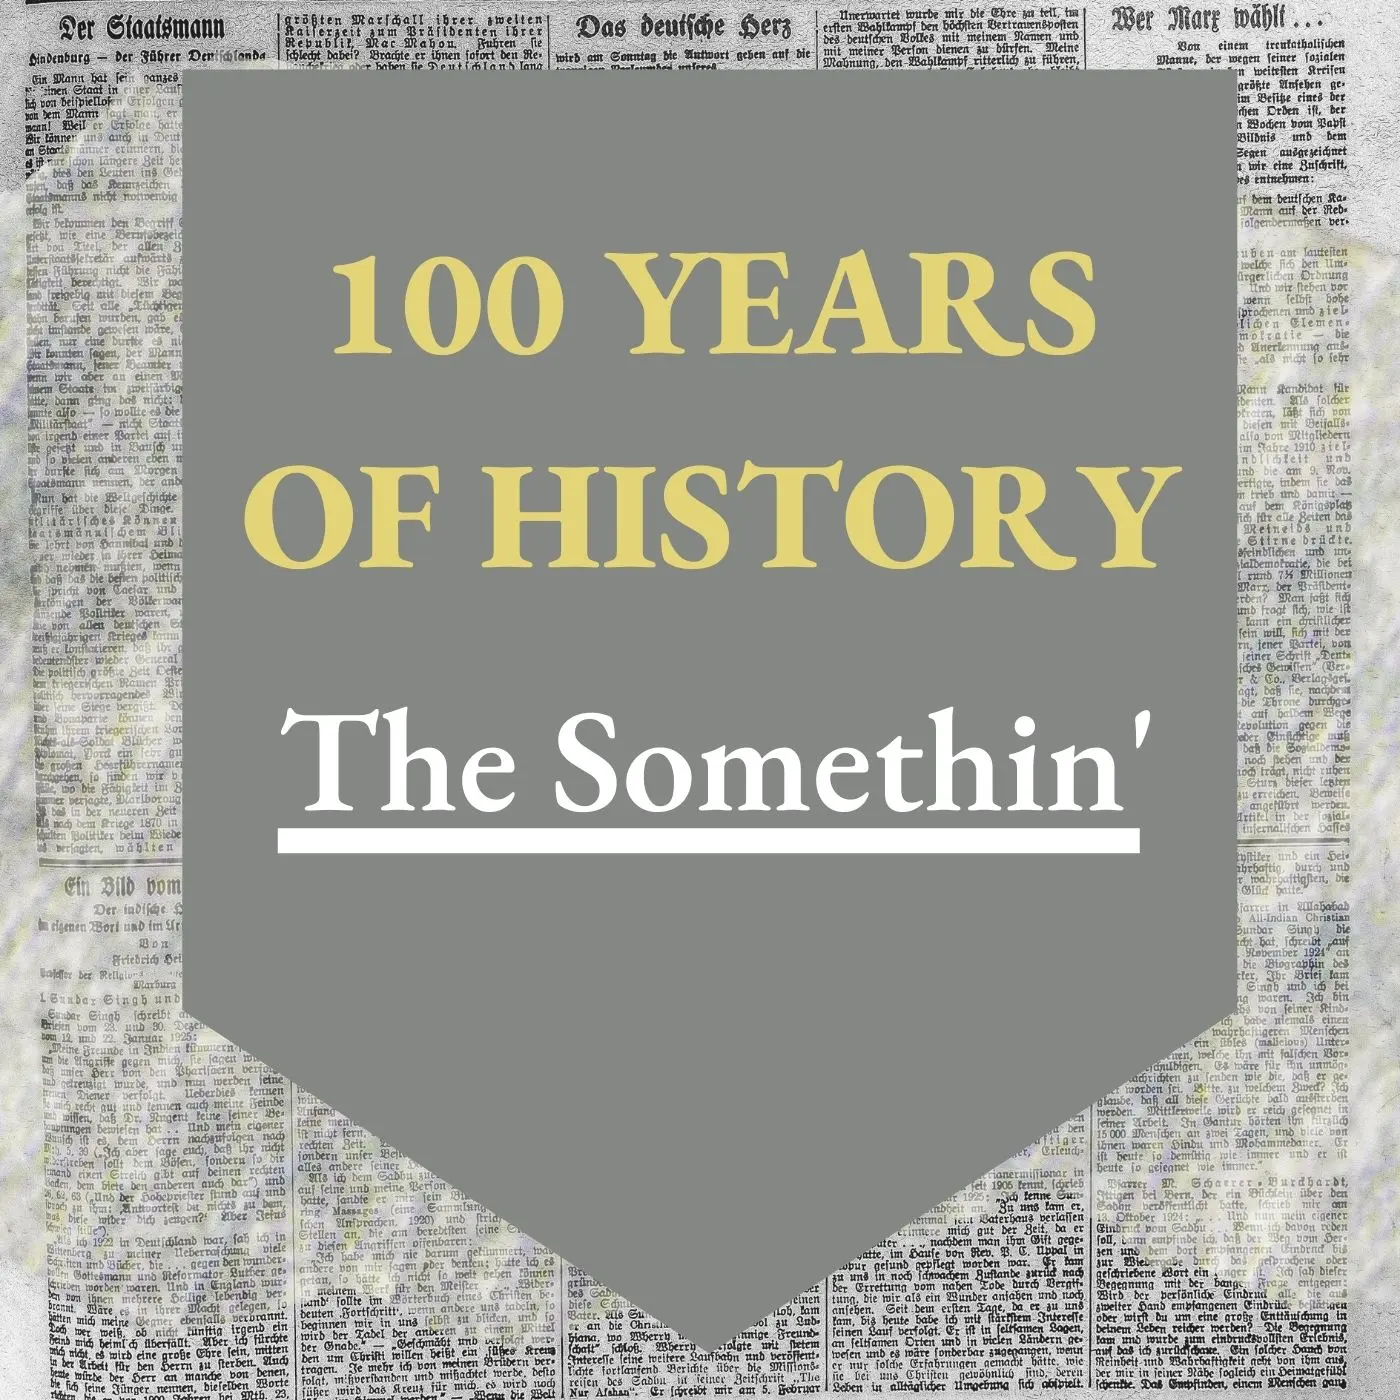 100 years of history: The athlete versus the scholar